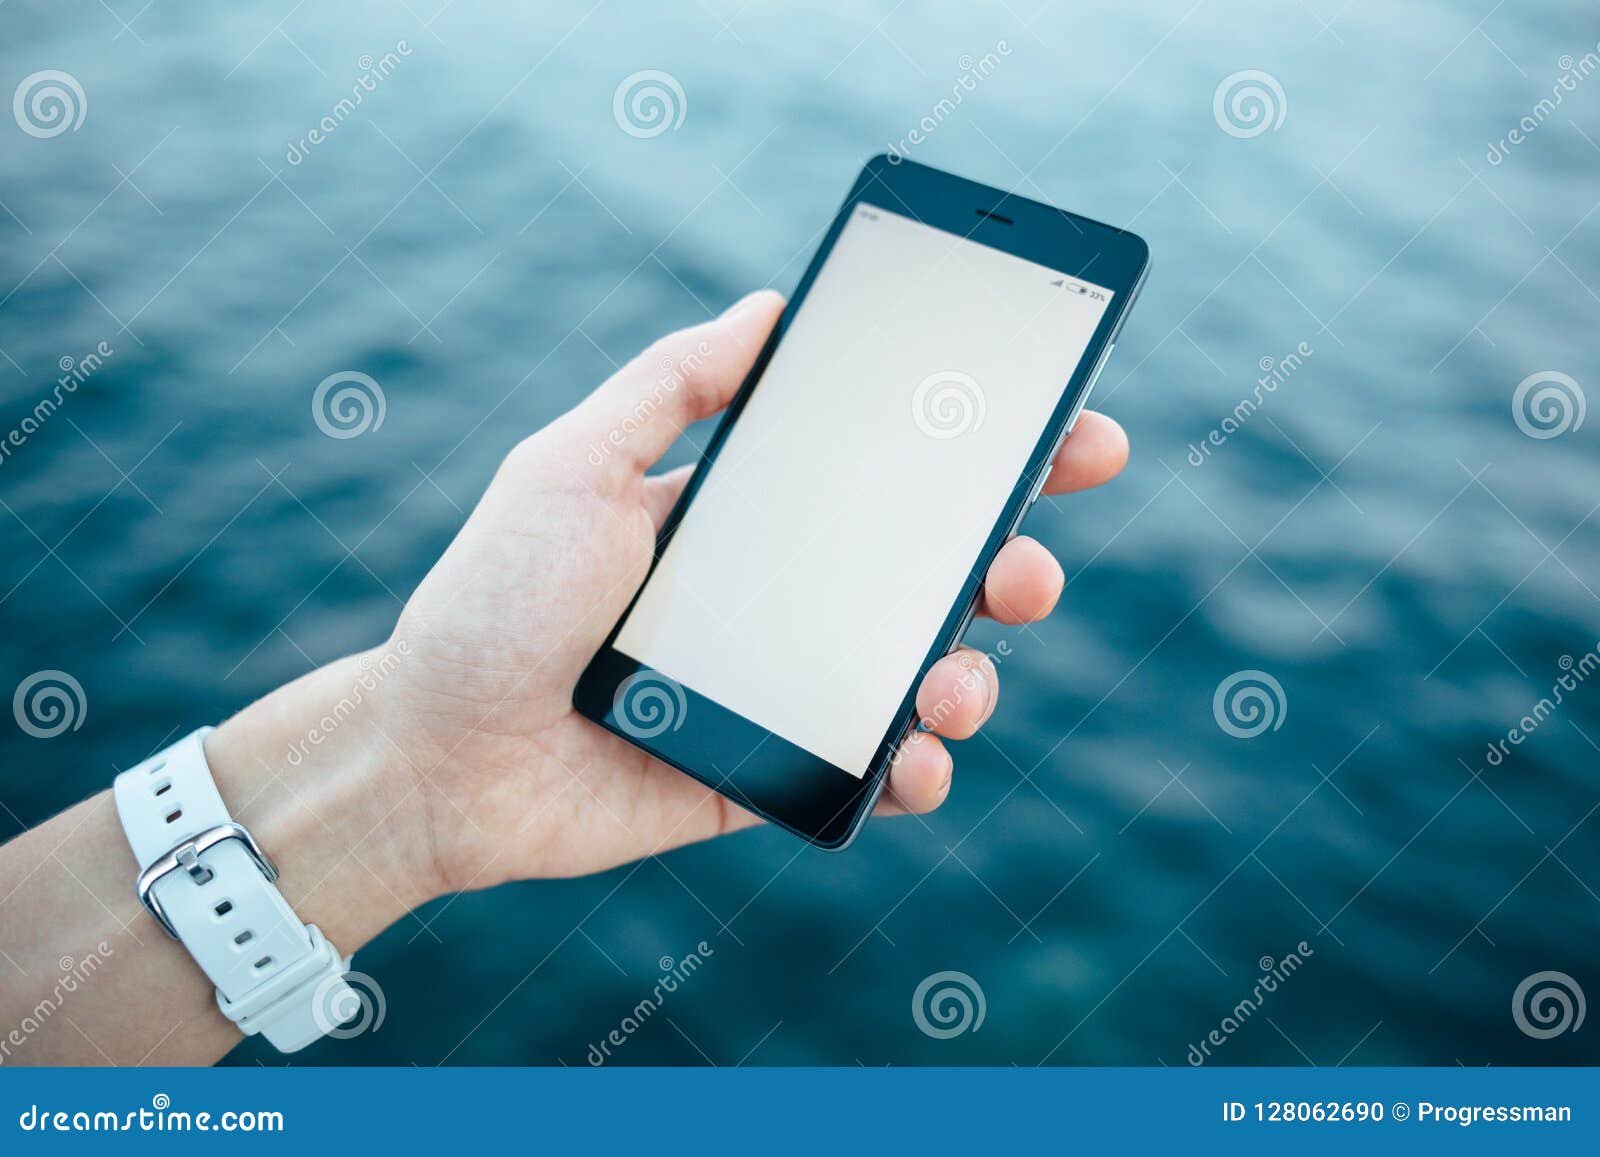 Clean Mobile Phone Screen Template in Female Hand Stock Photo